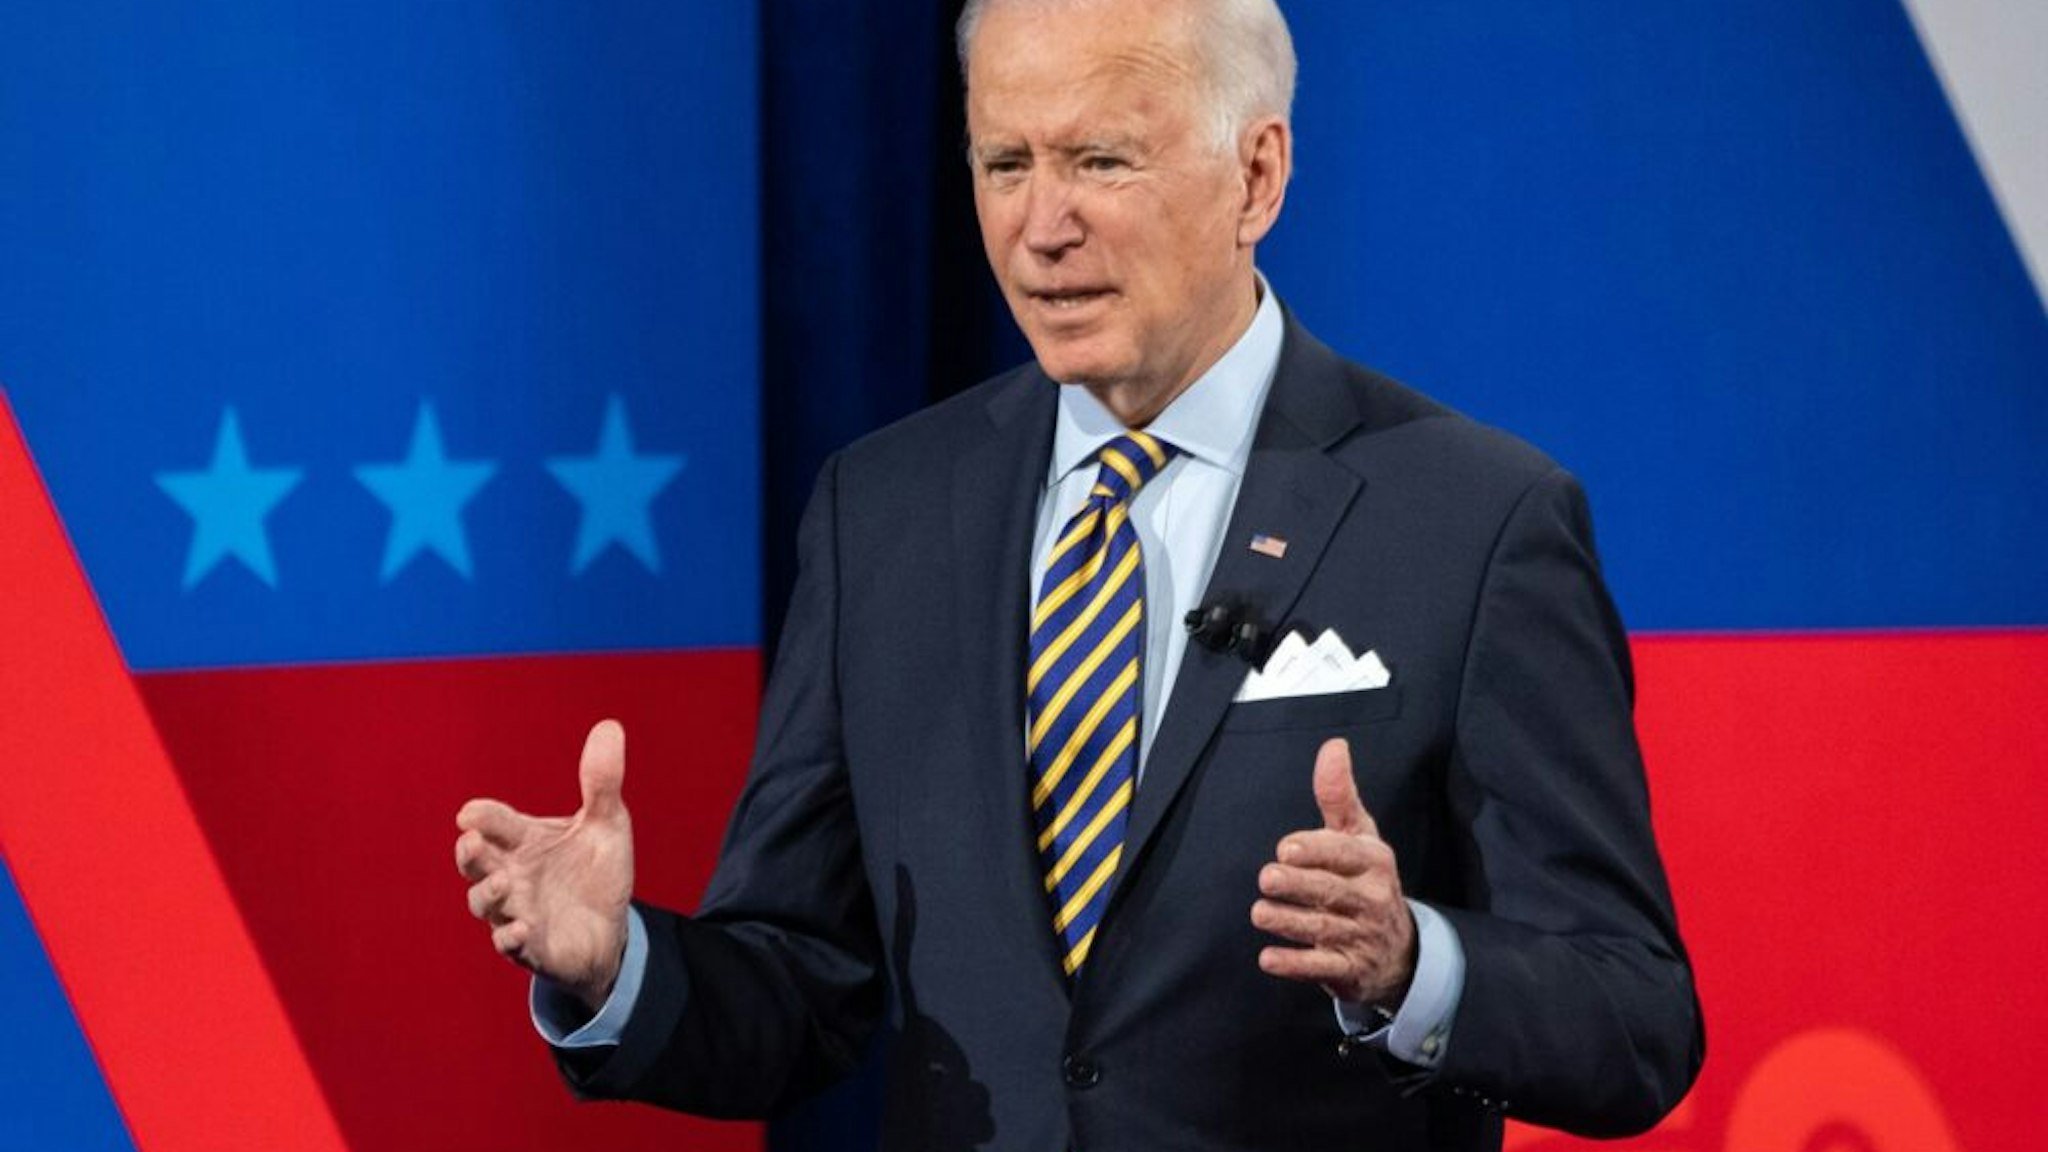 US President Joe Biden participates in a CNN town hall at the Pabst Theater in Milwaukee, Wisconsin, February 16, 2021.